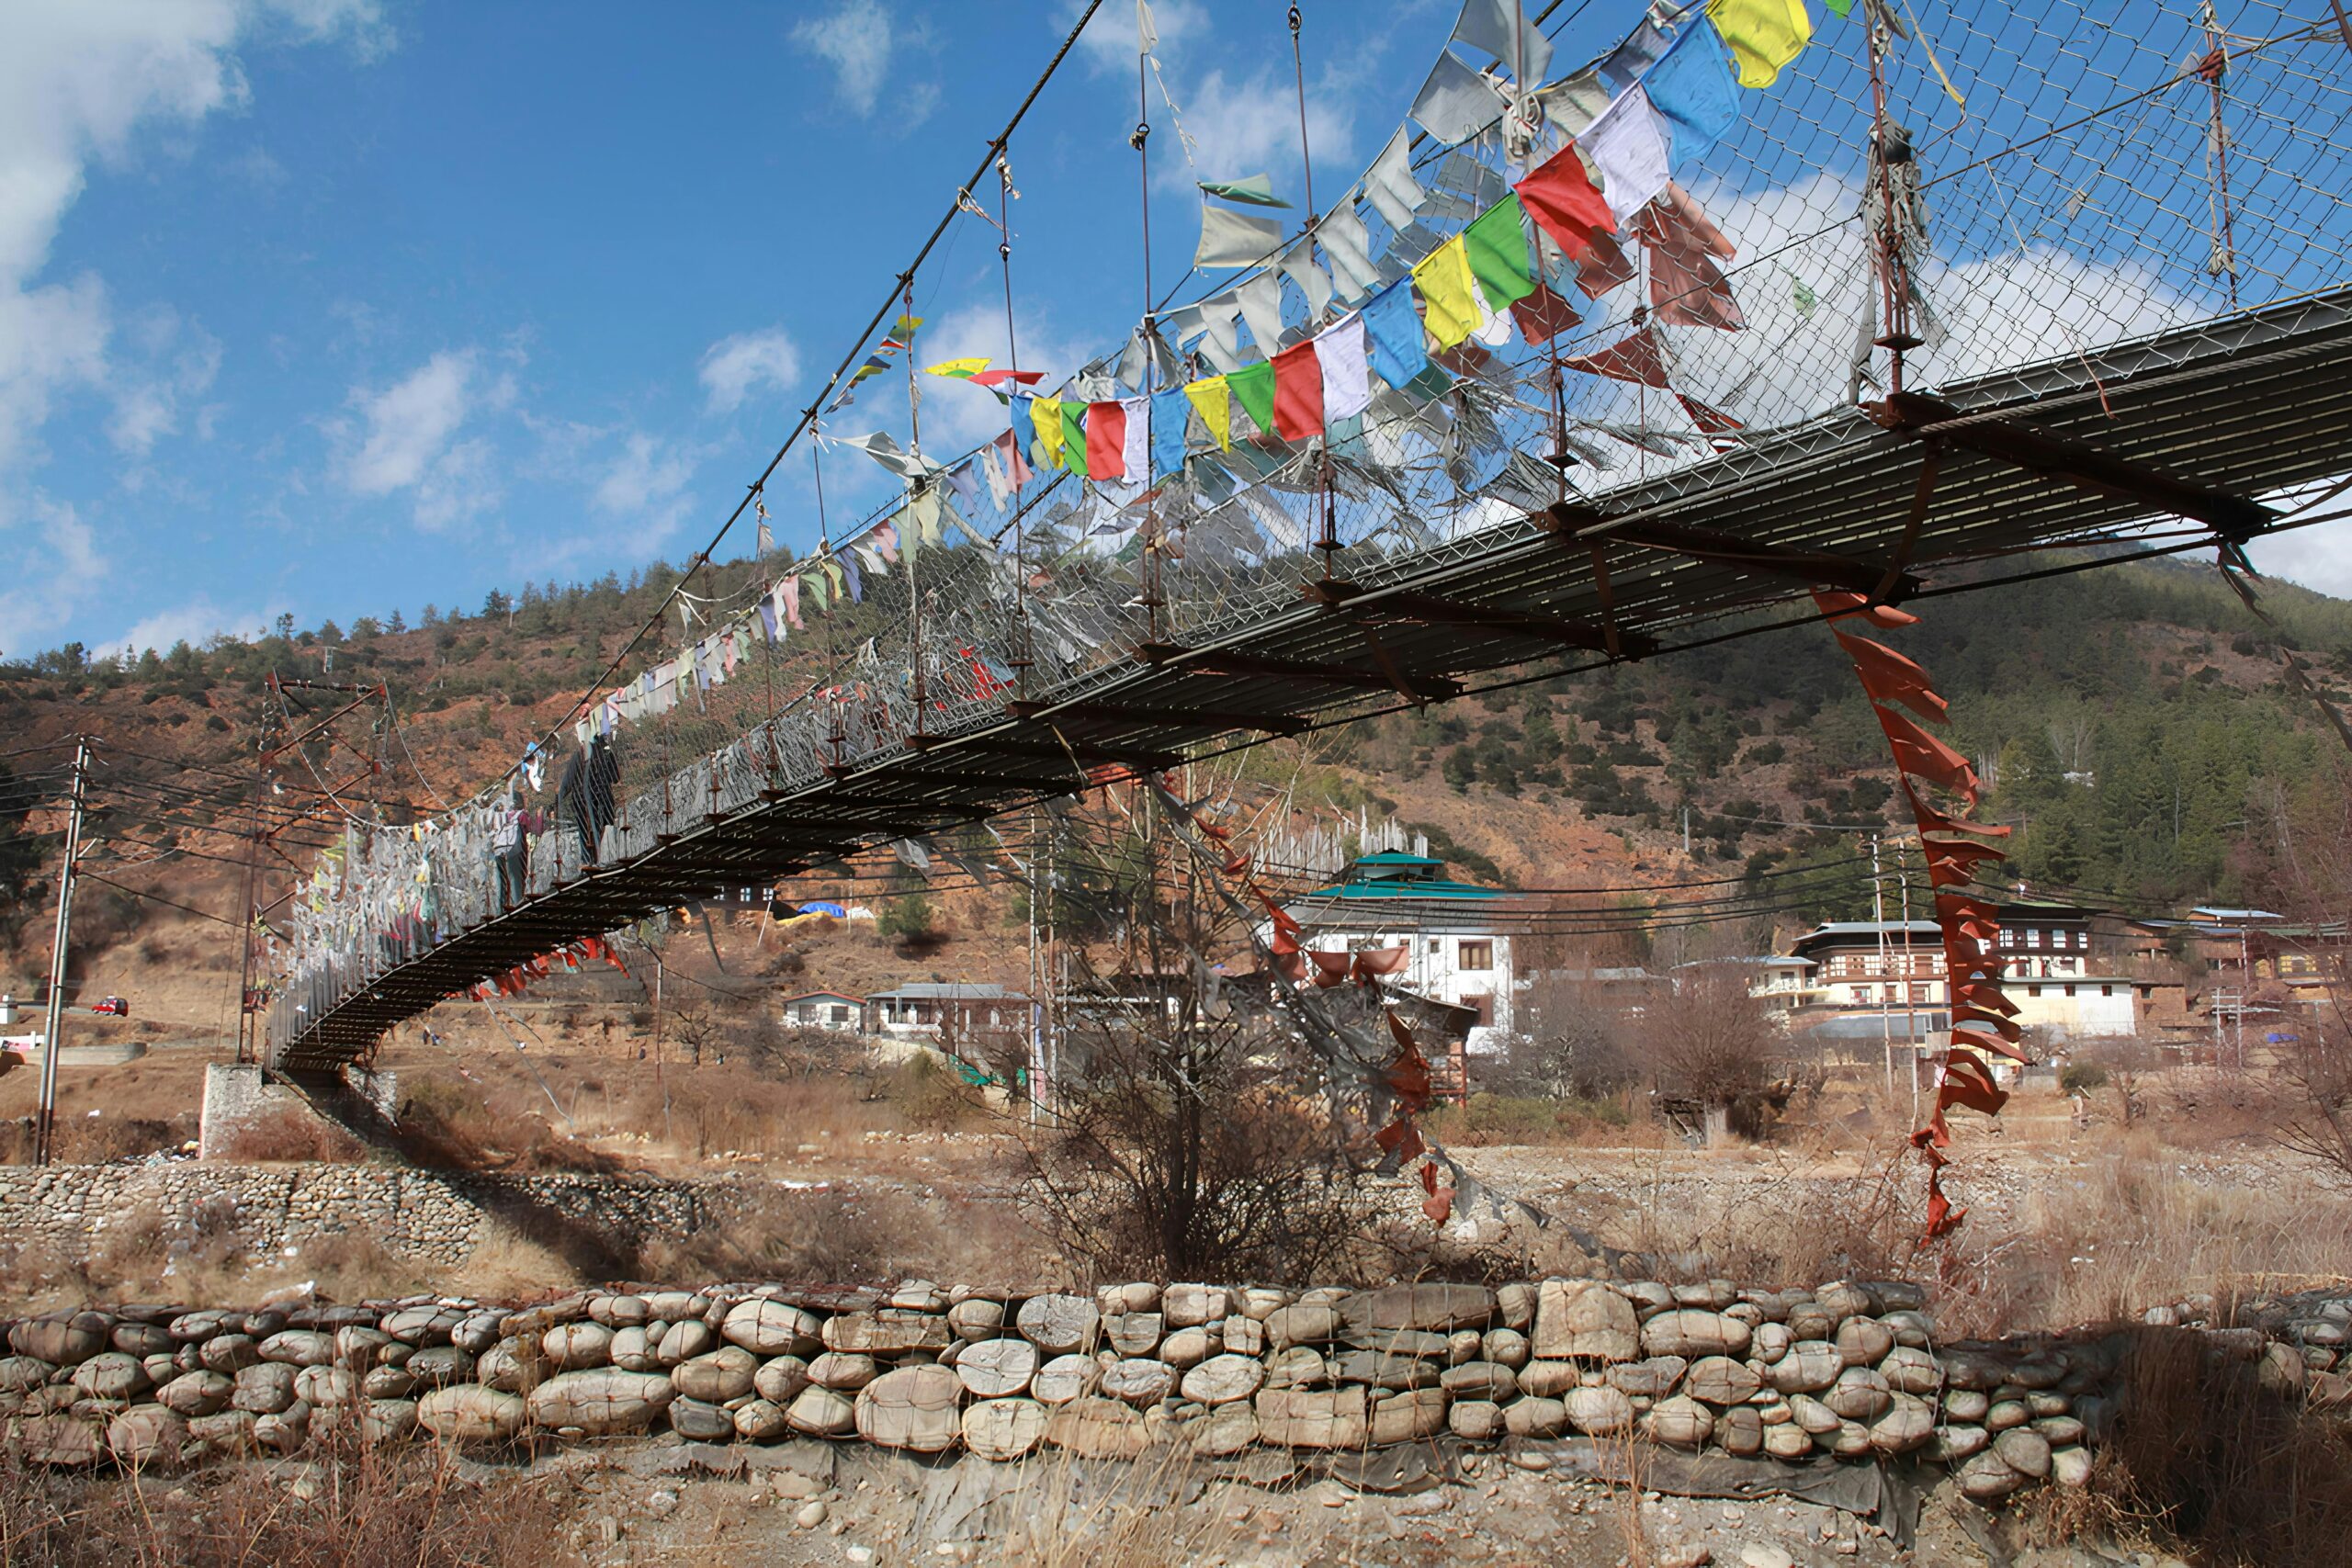 Wonders of Bhutan in 3 Nights: A Fascinating Festival Tour